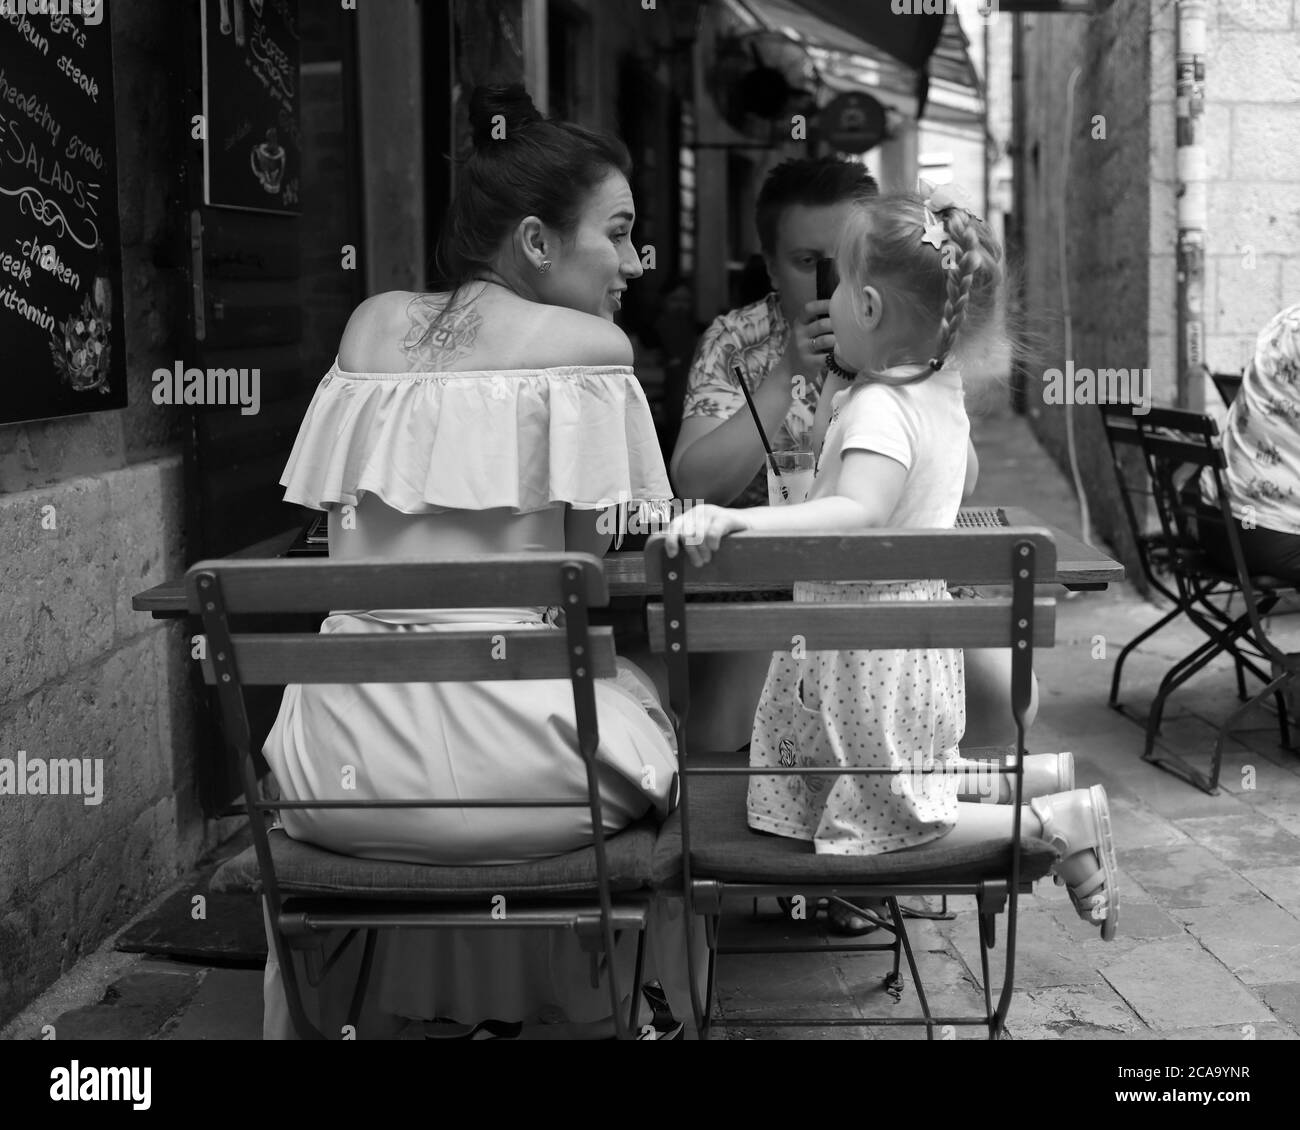 Montenegro, Sep 22, 2019: Couple with daughter spending time at a street café in Kotor Old Town (B/W) Stock Photo